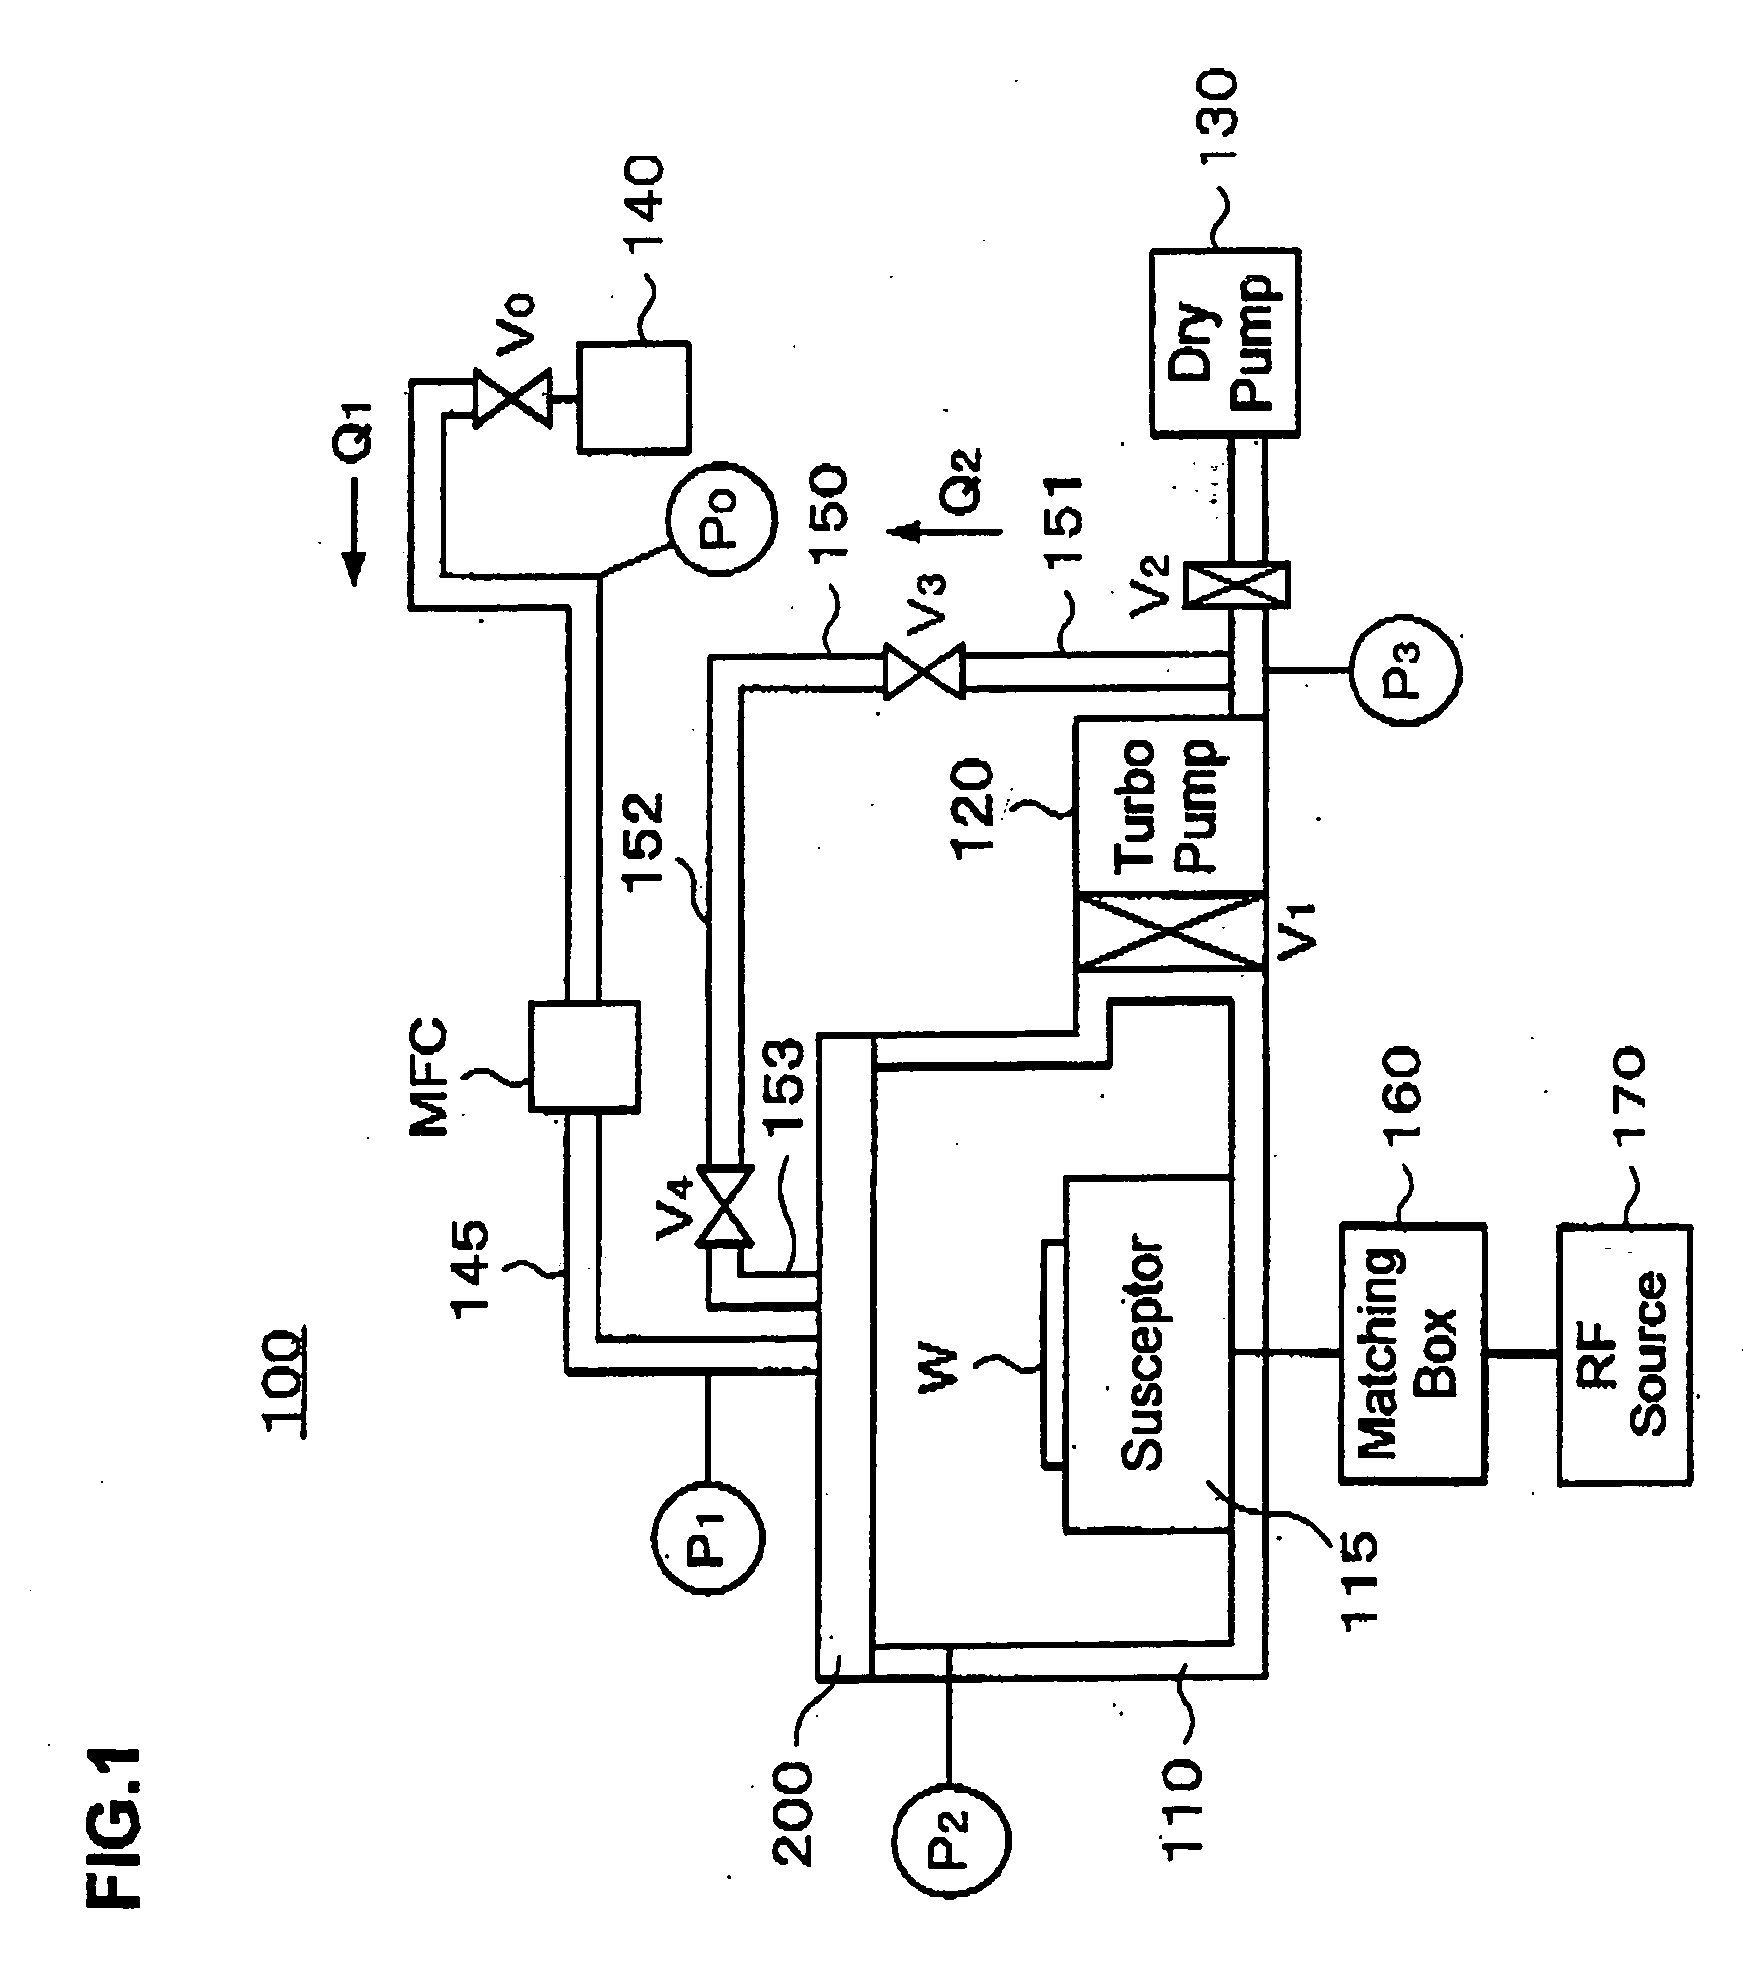 Processing method for conservation of processing gases